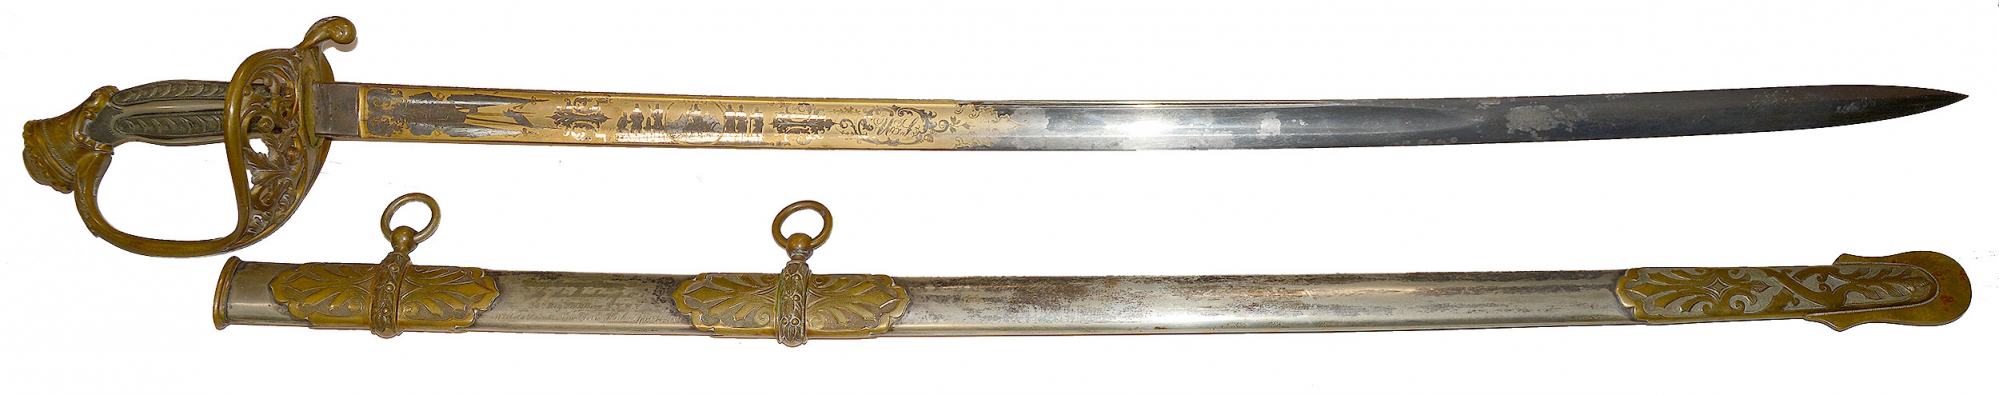 BEAUTIFUL, ORNATE, SILVERED AND GILT PRESENTATION SWORD OF LT. GEORGE H. WING 14th NEW YORK HEAVY ARTILLERY, SERVED AS INFANTRY 1864: SPOTTSYLVANIA, COLD HARBOR, PETERSBURG ASSAULT, CAPTURED AT THE CRATER 